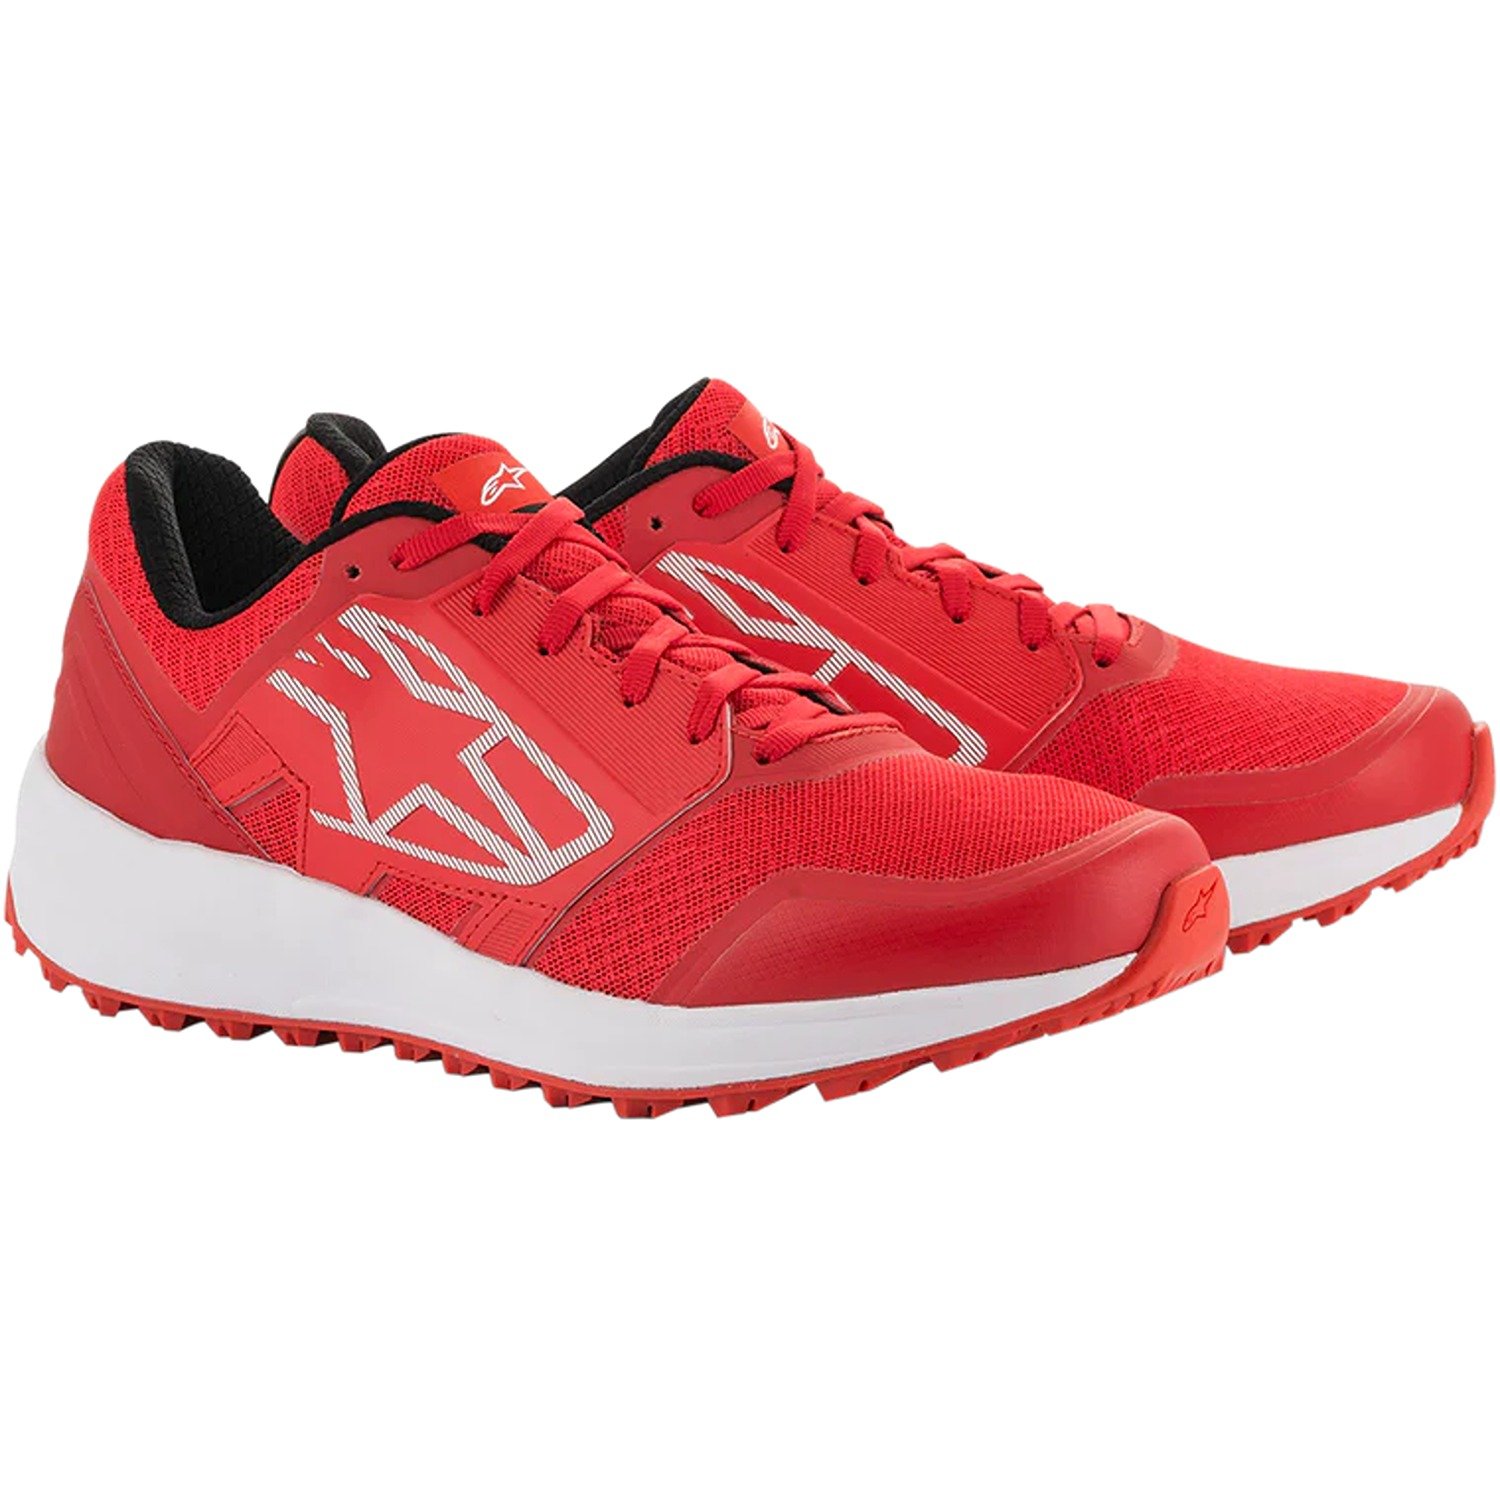 Image of EU Alpinestars Meta Trail Shoes Red White Taille US 135